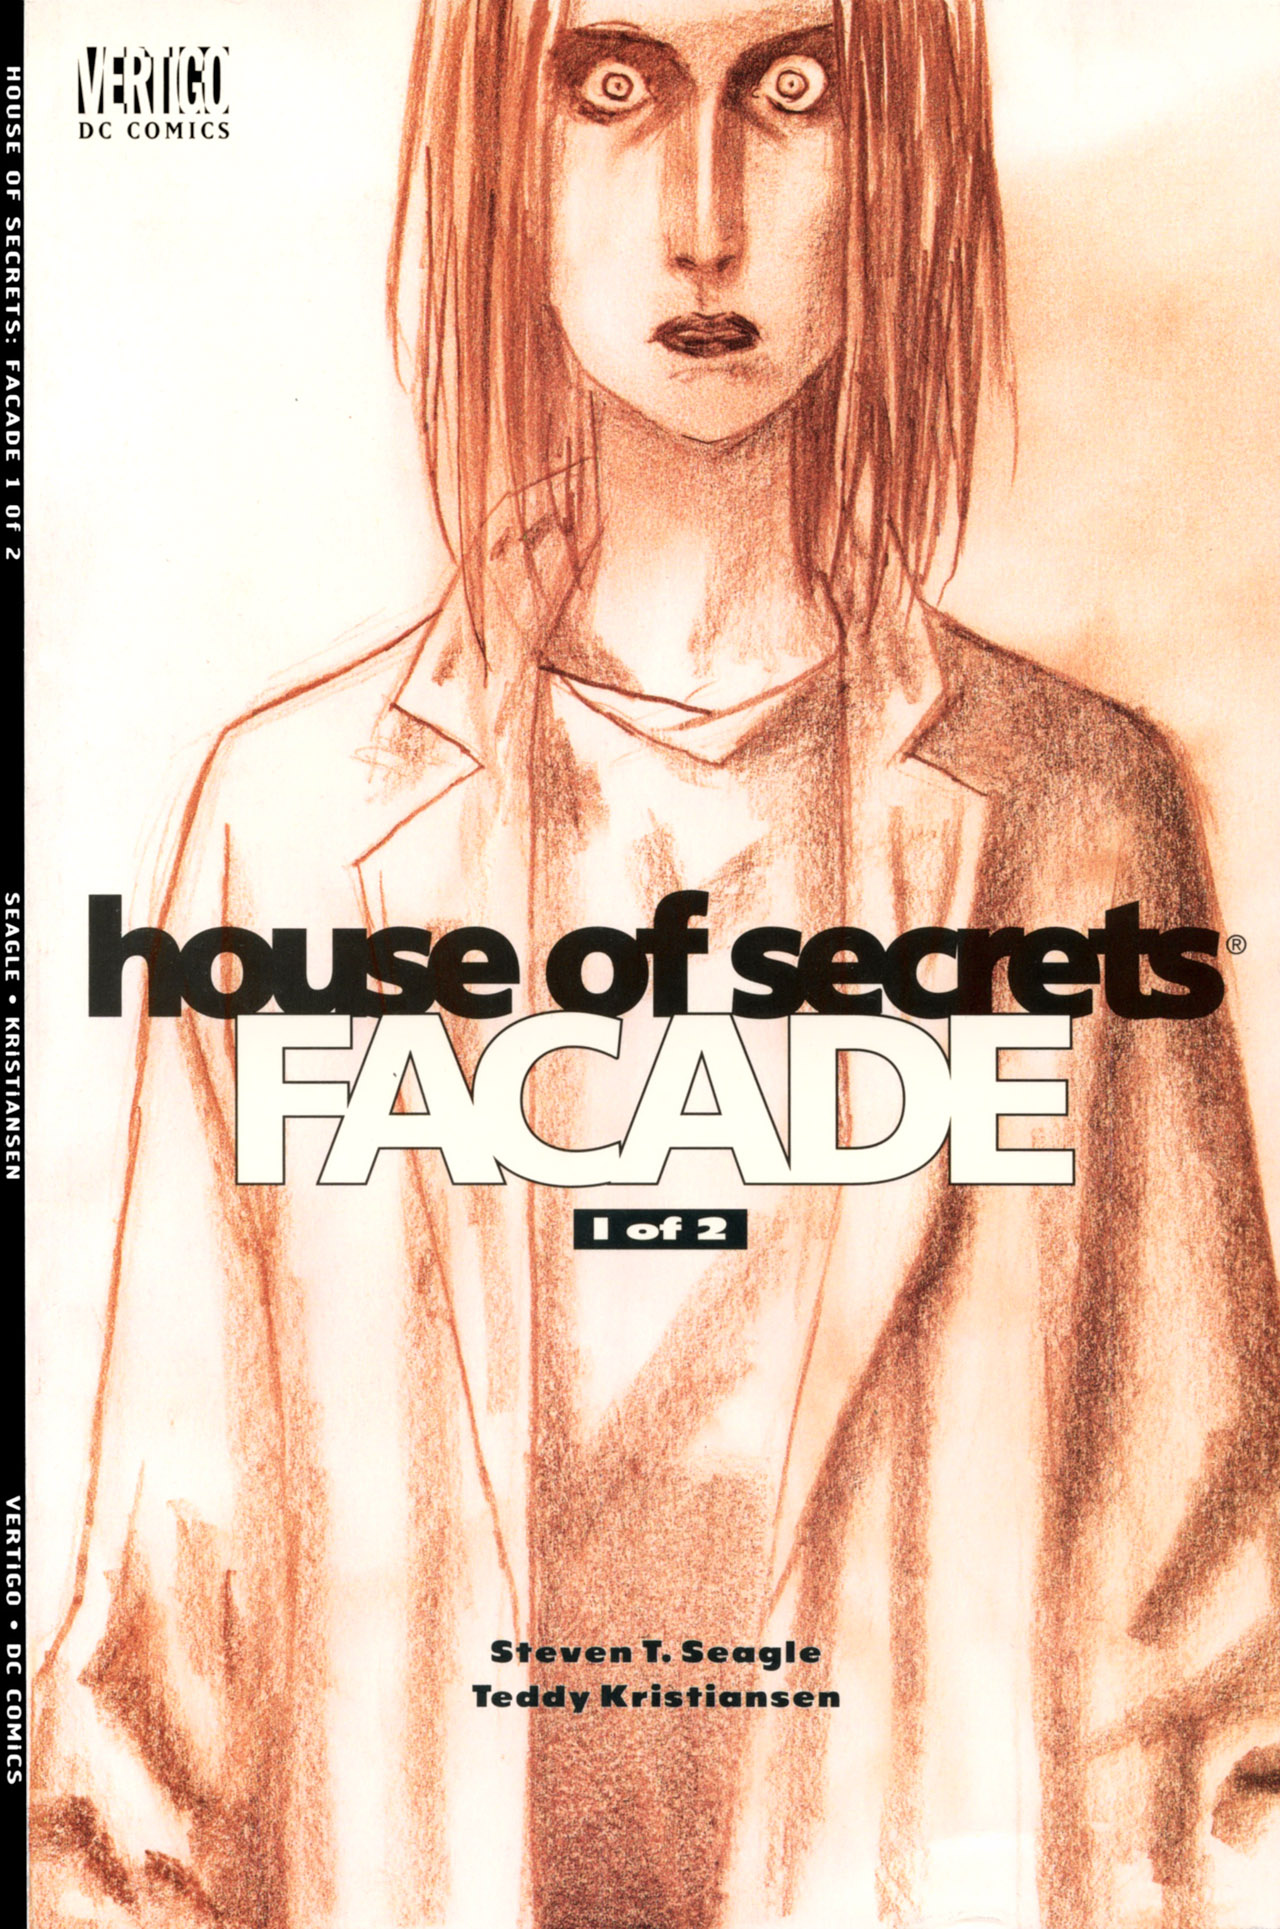 Read online House of Secrets: Facade comic -  Issue #1 - 1